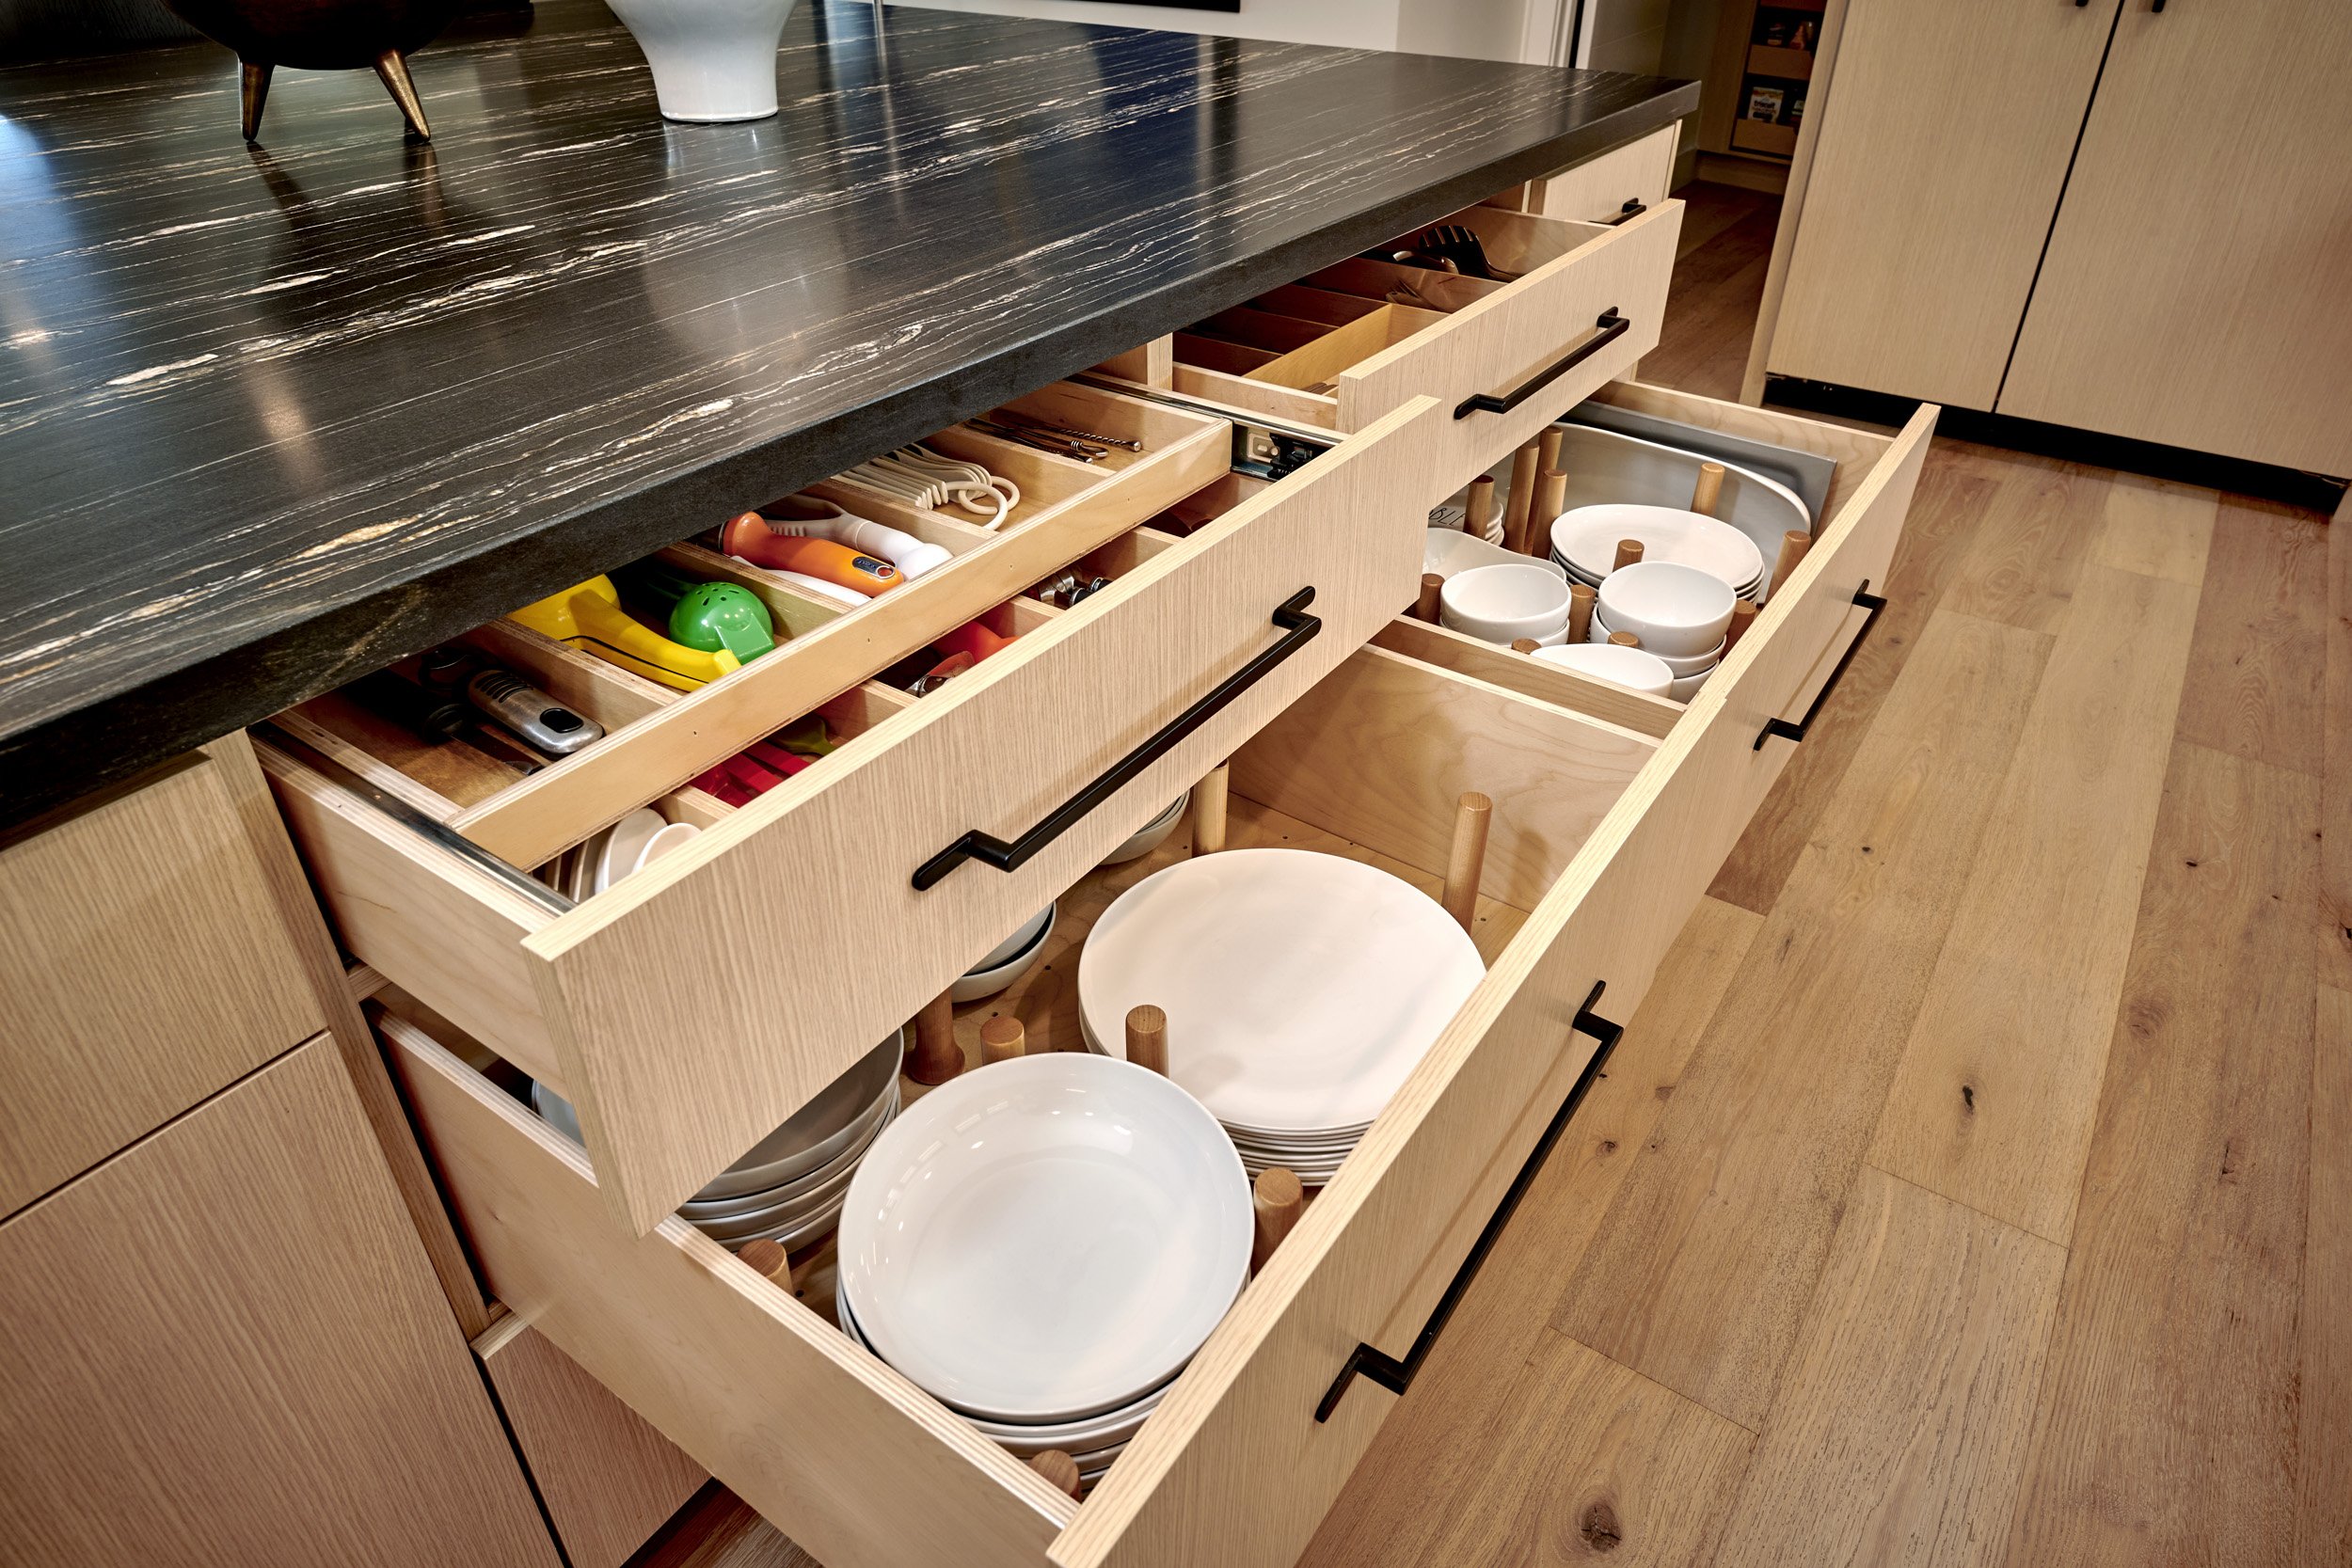 DISCOVER THE SECRET TO AN ORGANIZED KITCHEN WITH TOP CABINET